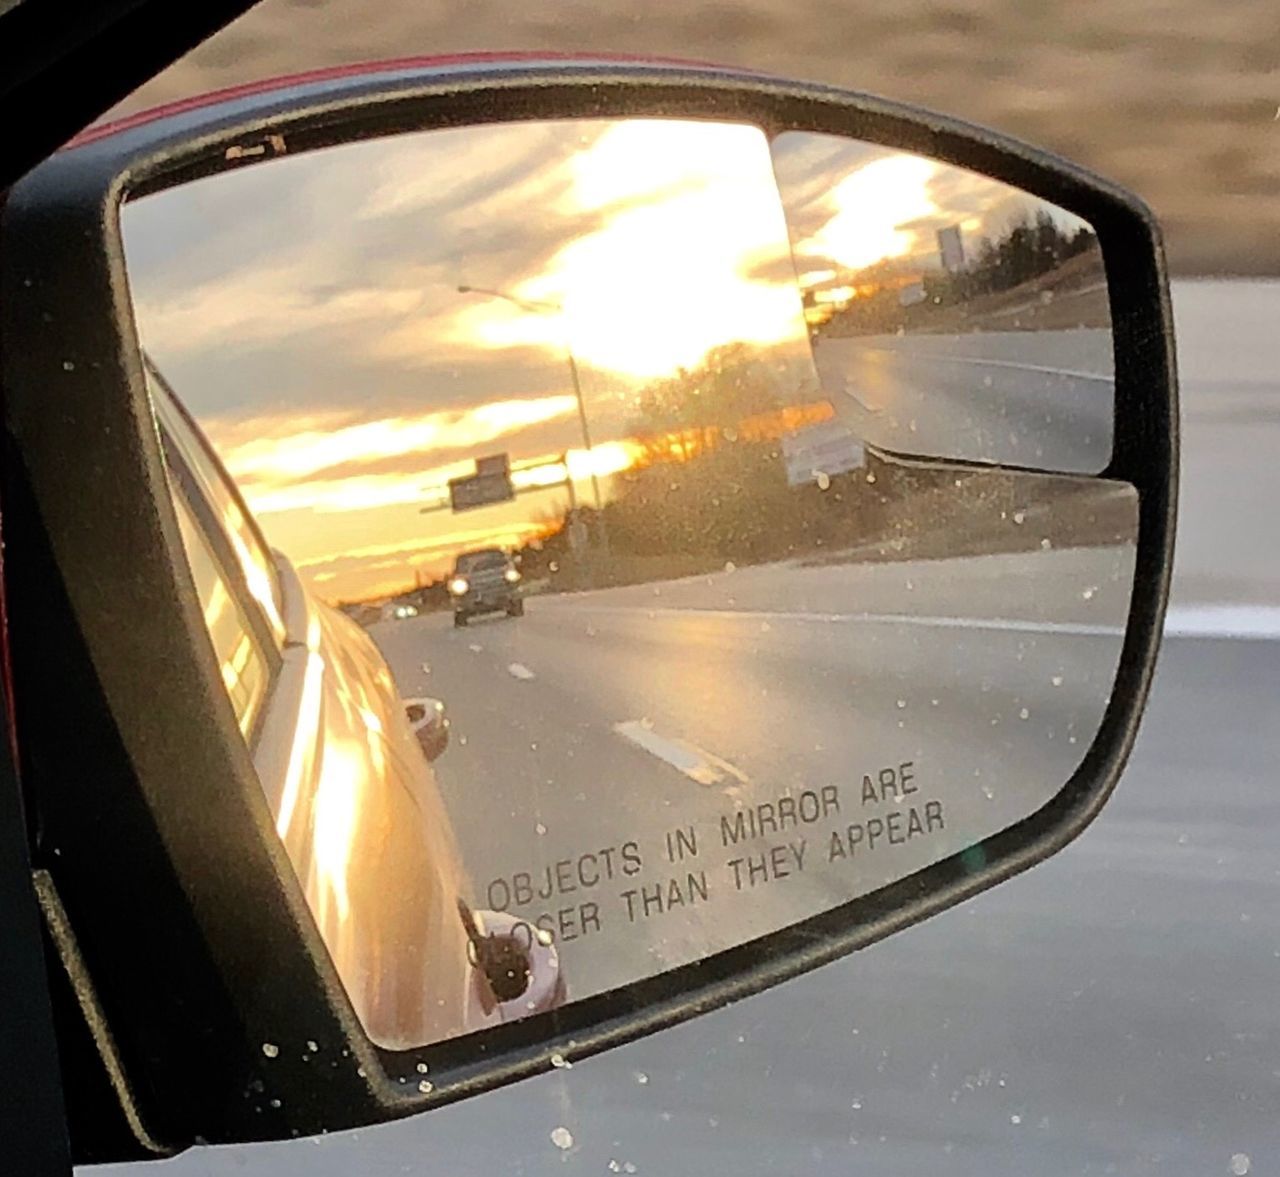 reflection, car, mode of transportation, transportation, motor vehicle, side-view mirror, rear-view mirror, glass, sunset, sky, light, mirror, automotive mirror, window, land vehicle, nature, close-up, travel, automotive exterior, cloud, no people, vehicle, vehicle mirror, outdoors, glasses, sunglasses, city